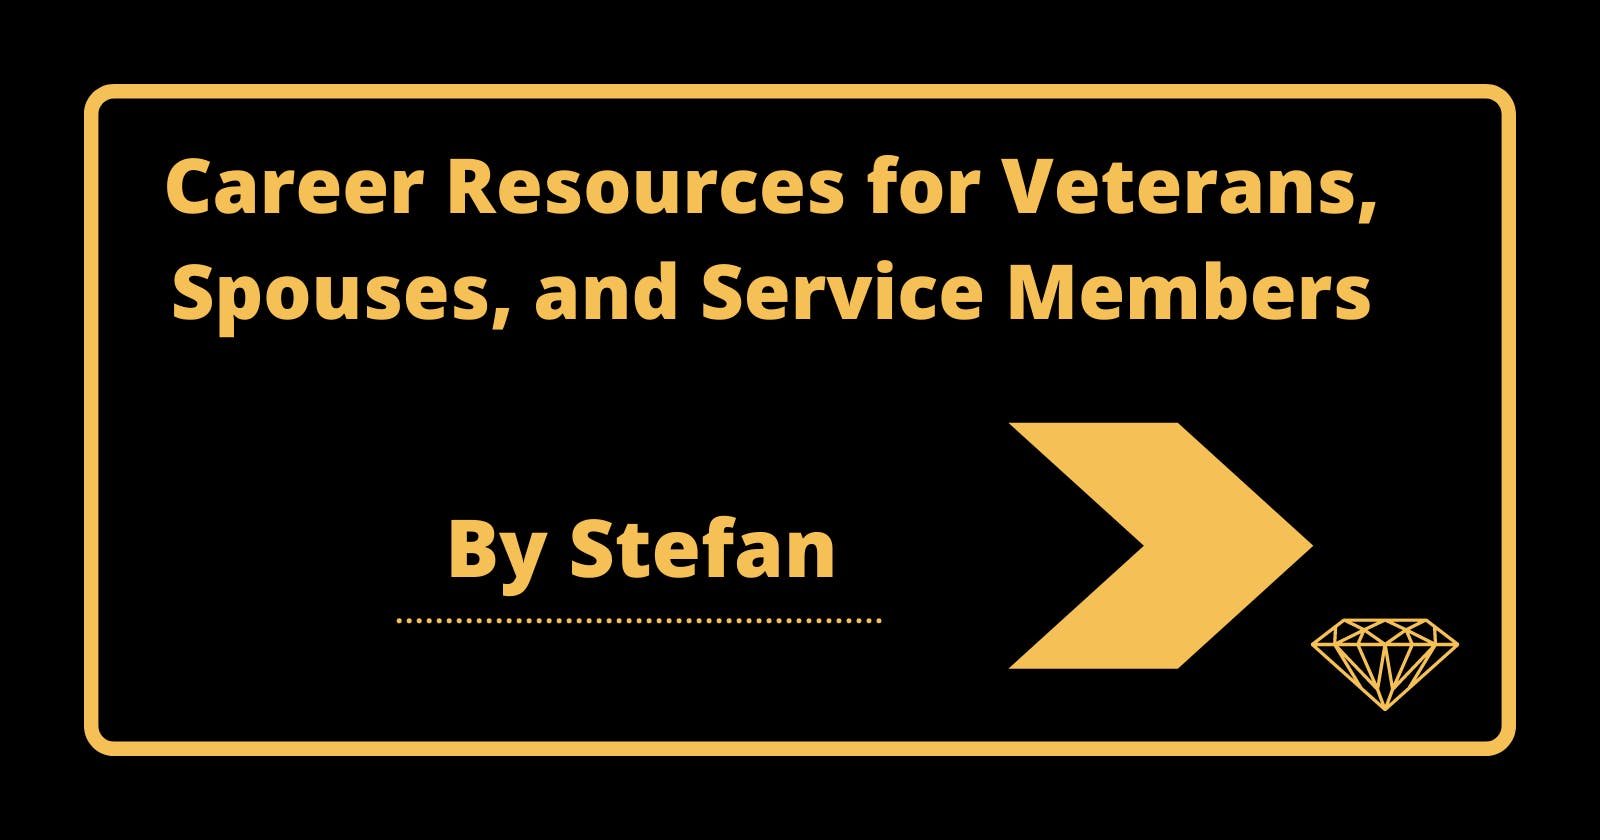 Career Resources for Veterans, Spouses, and Transitioning Service Members